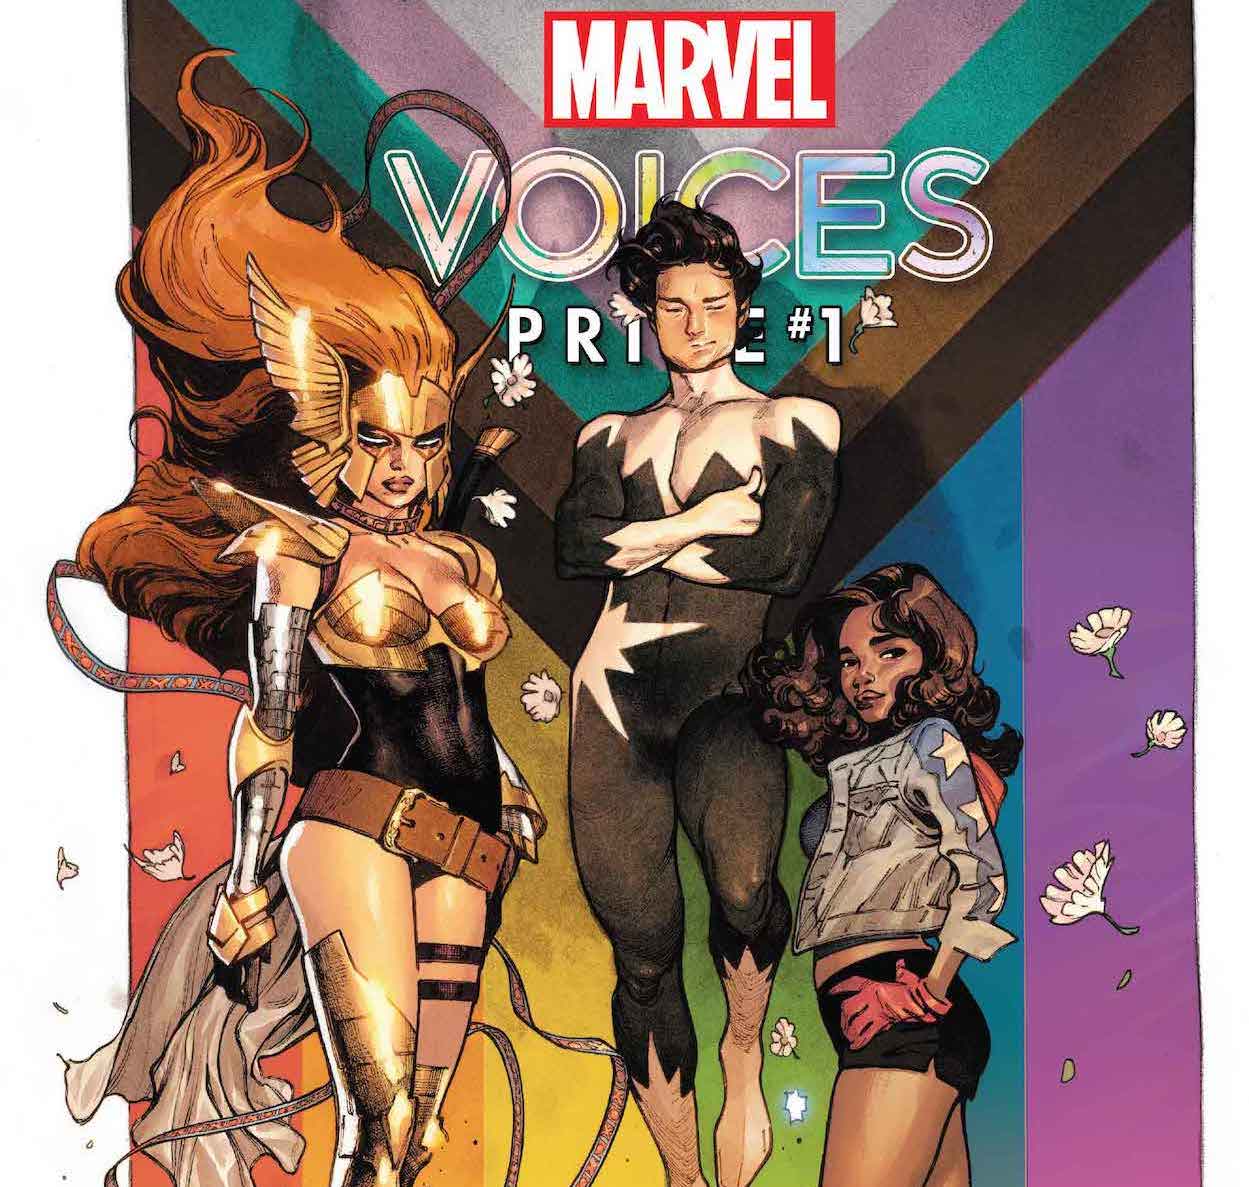 Marvel adds Olivier Coipel variant cover to 'Marvel's Voices: Pride' #1